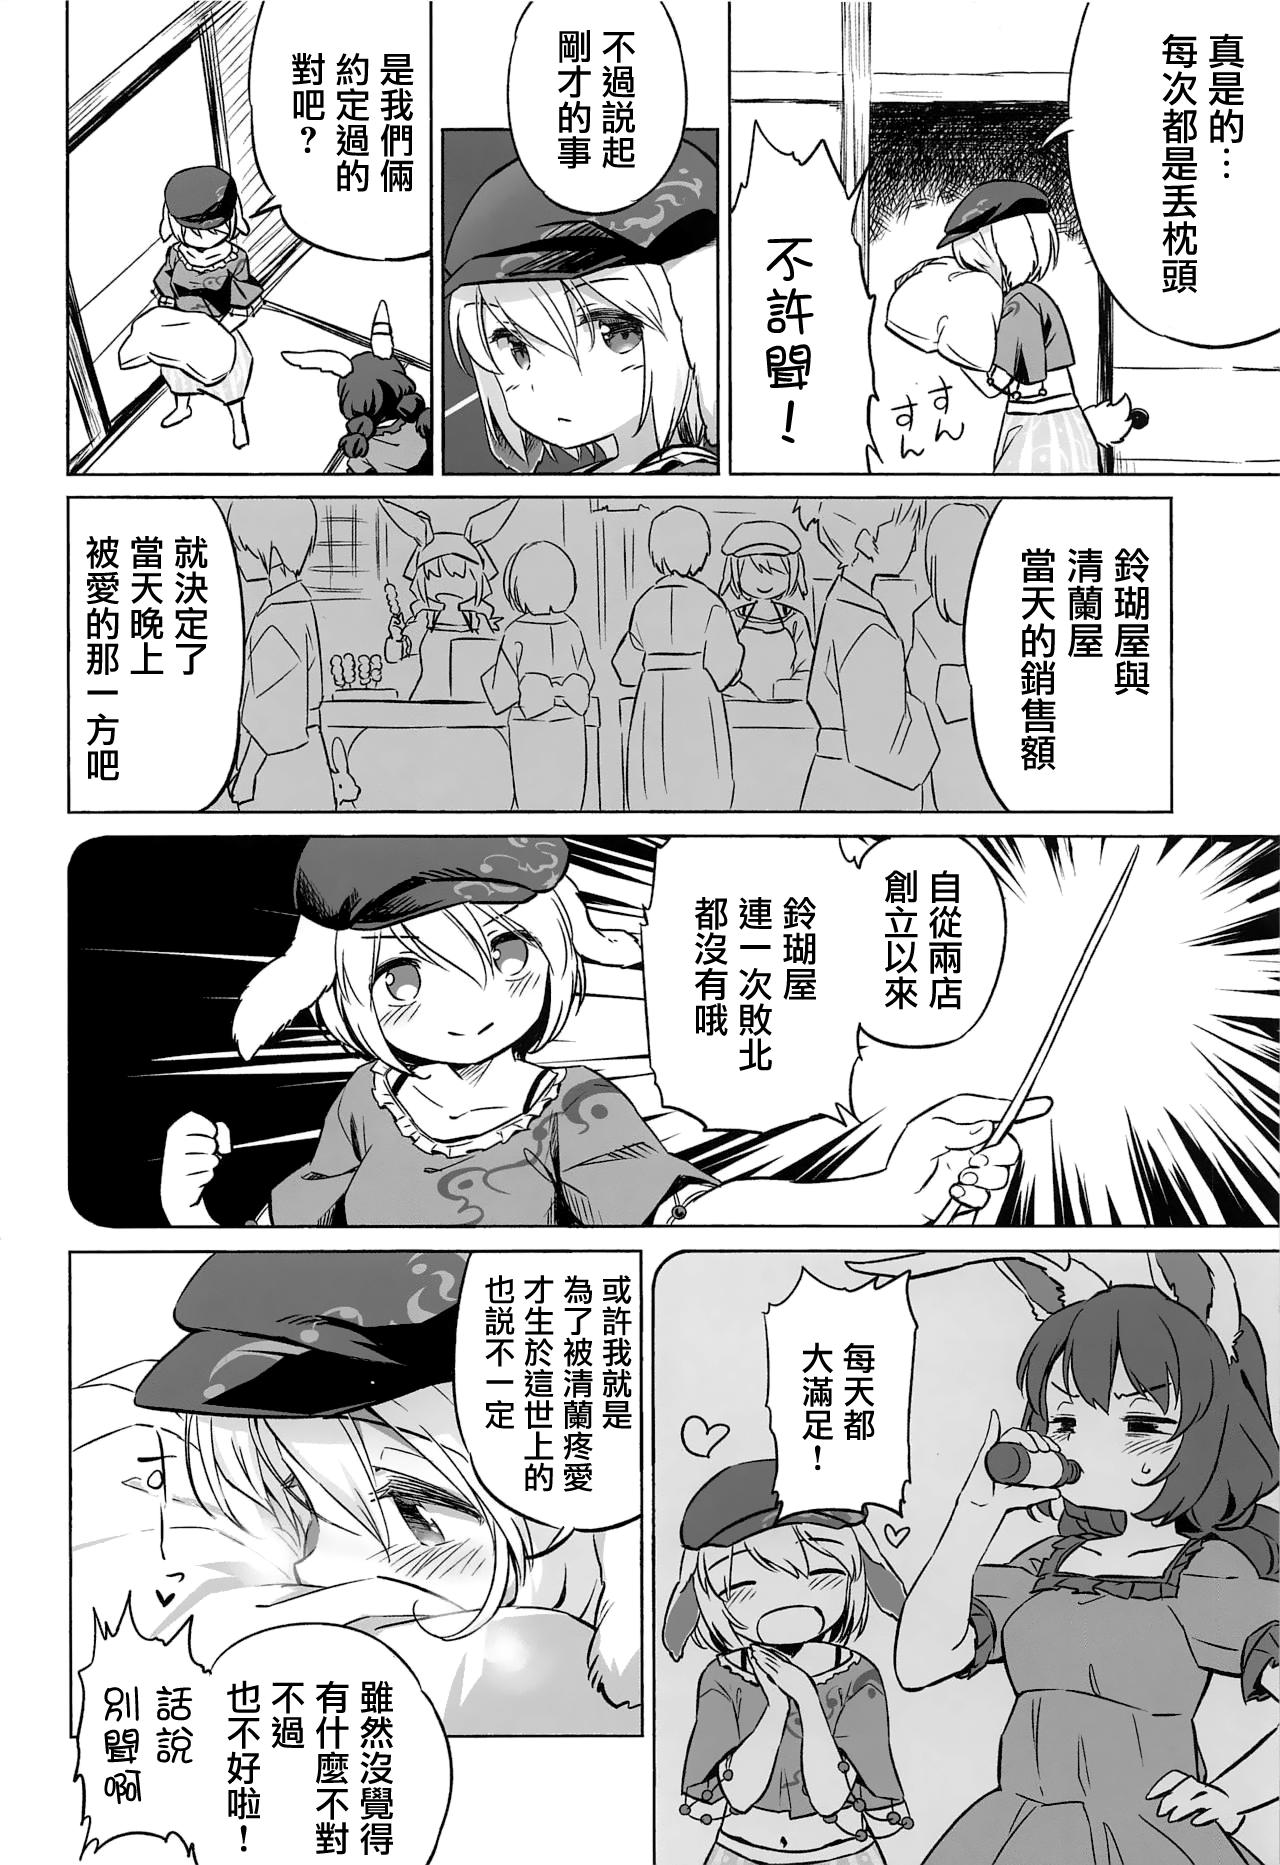 Slave Granny Smith Mating - Touhou project Blacks - Page 7